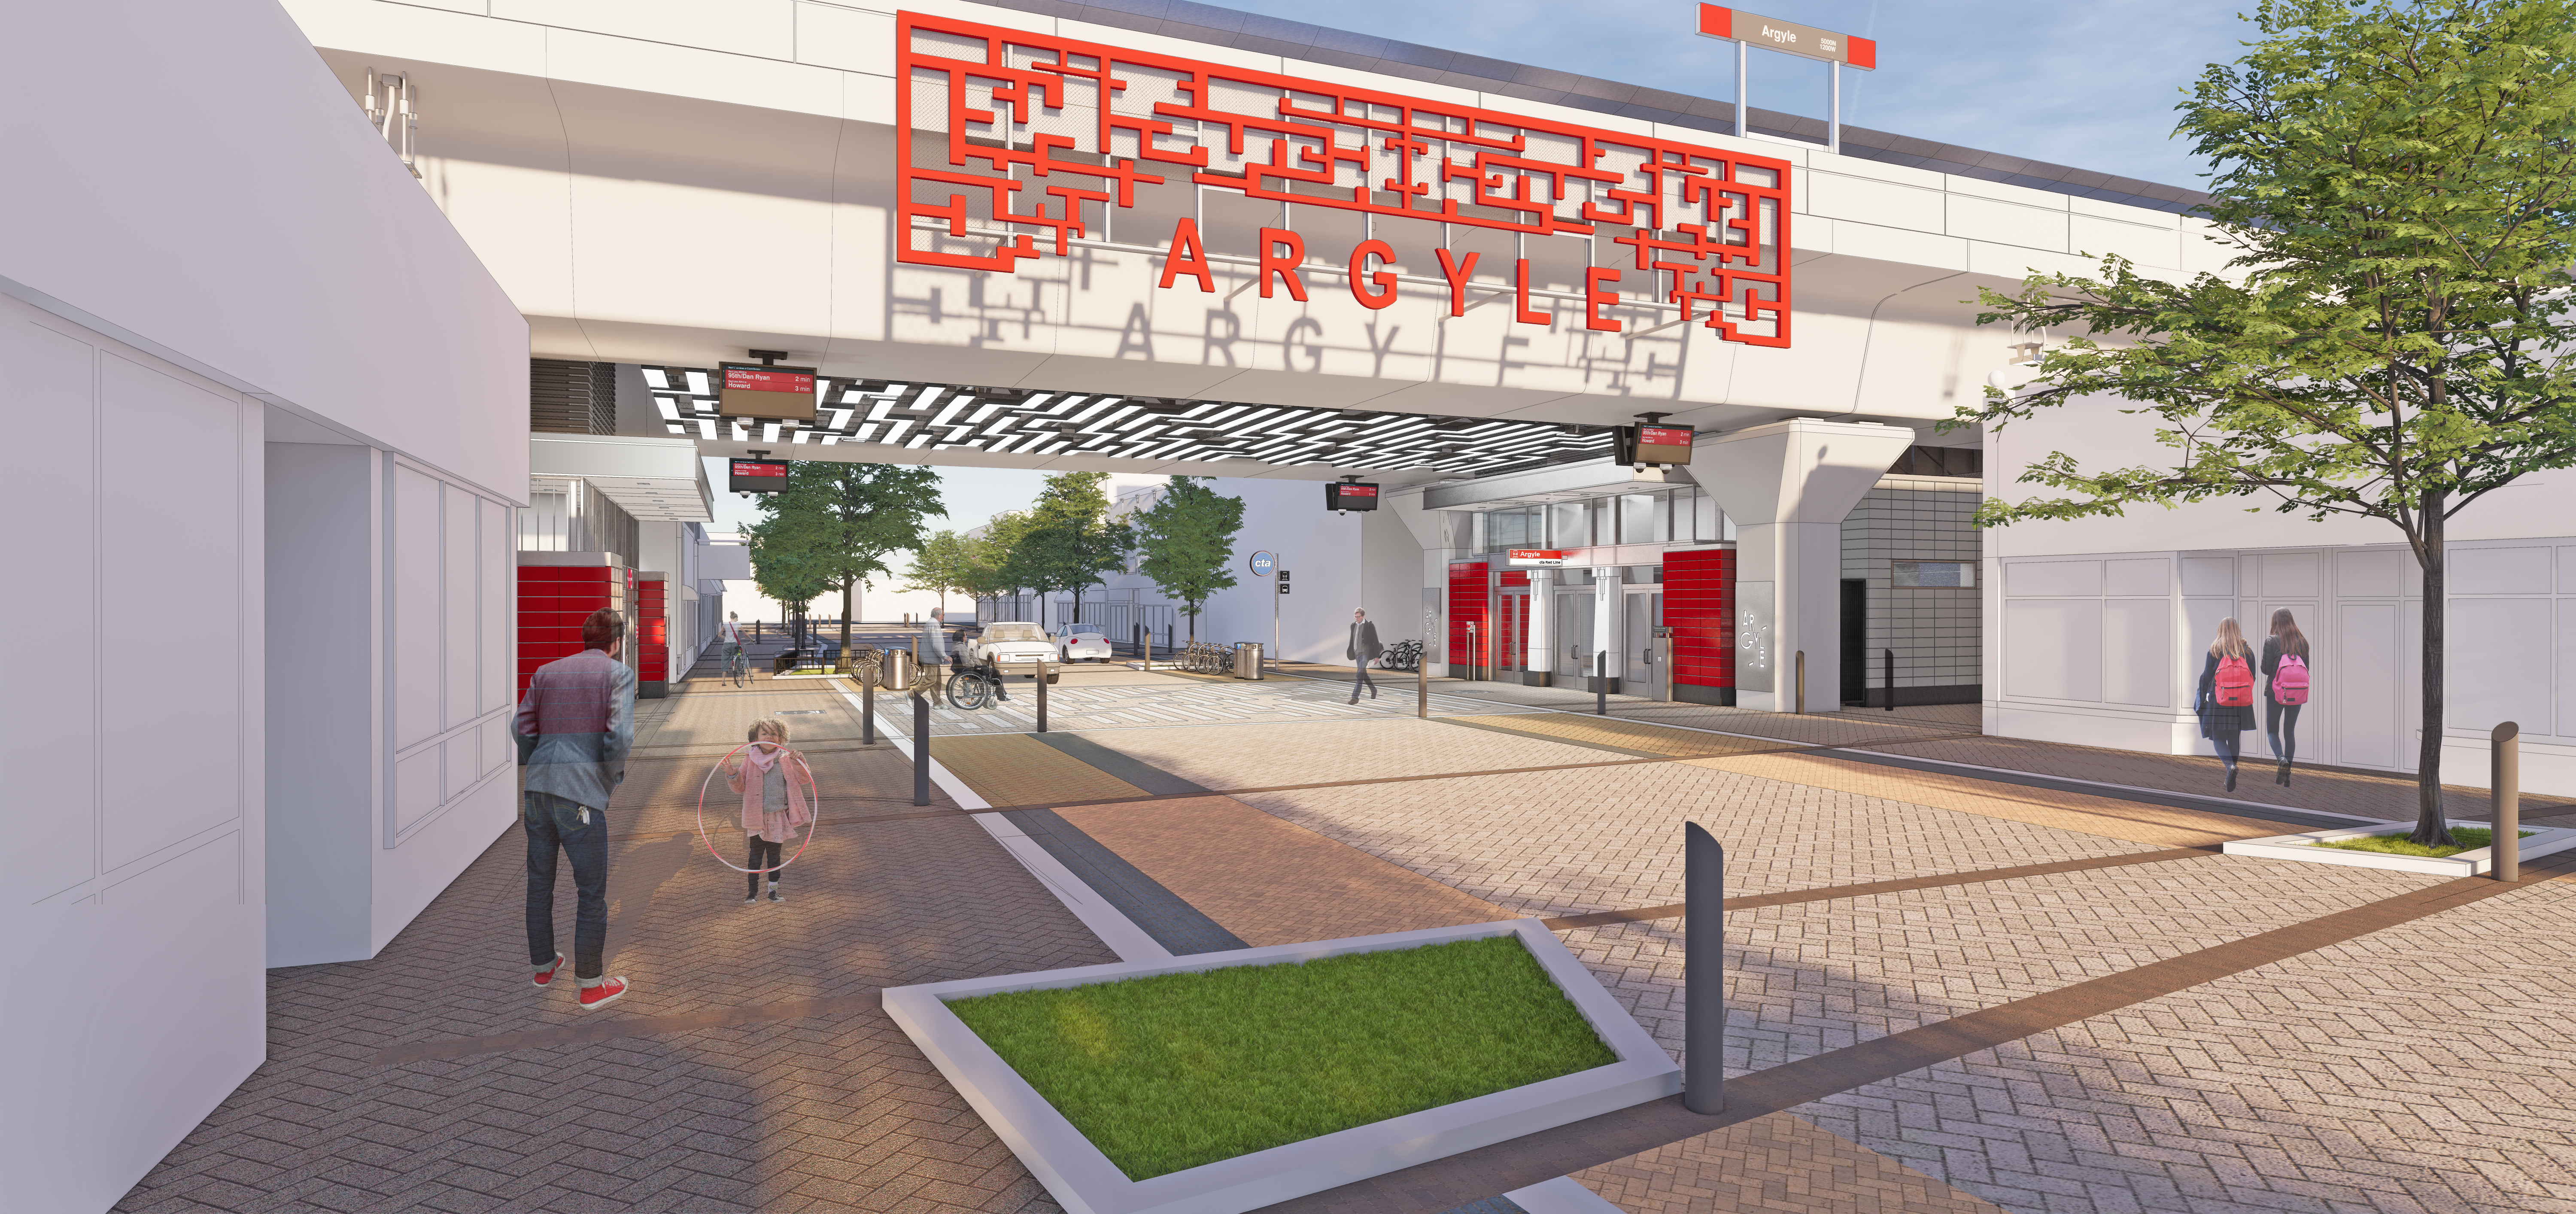 Rendering of the new Argyle station